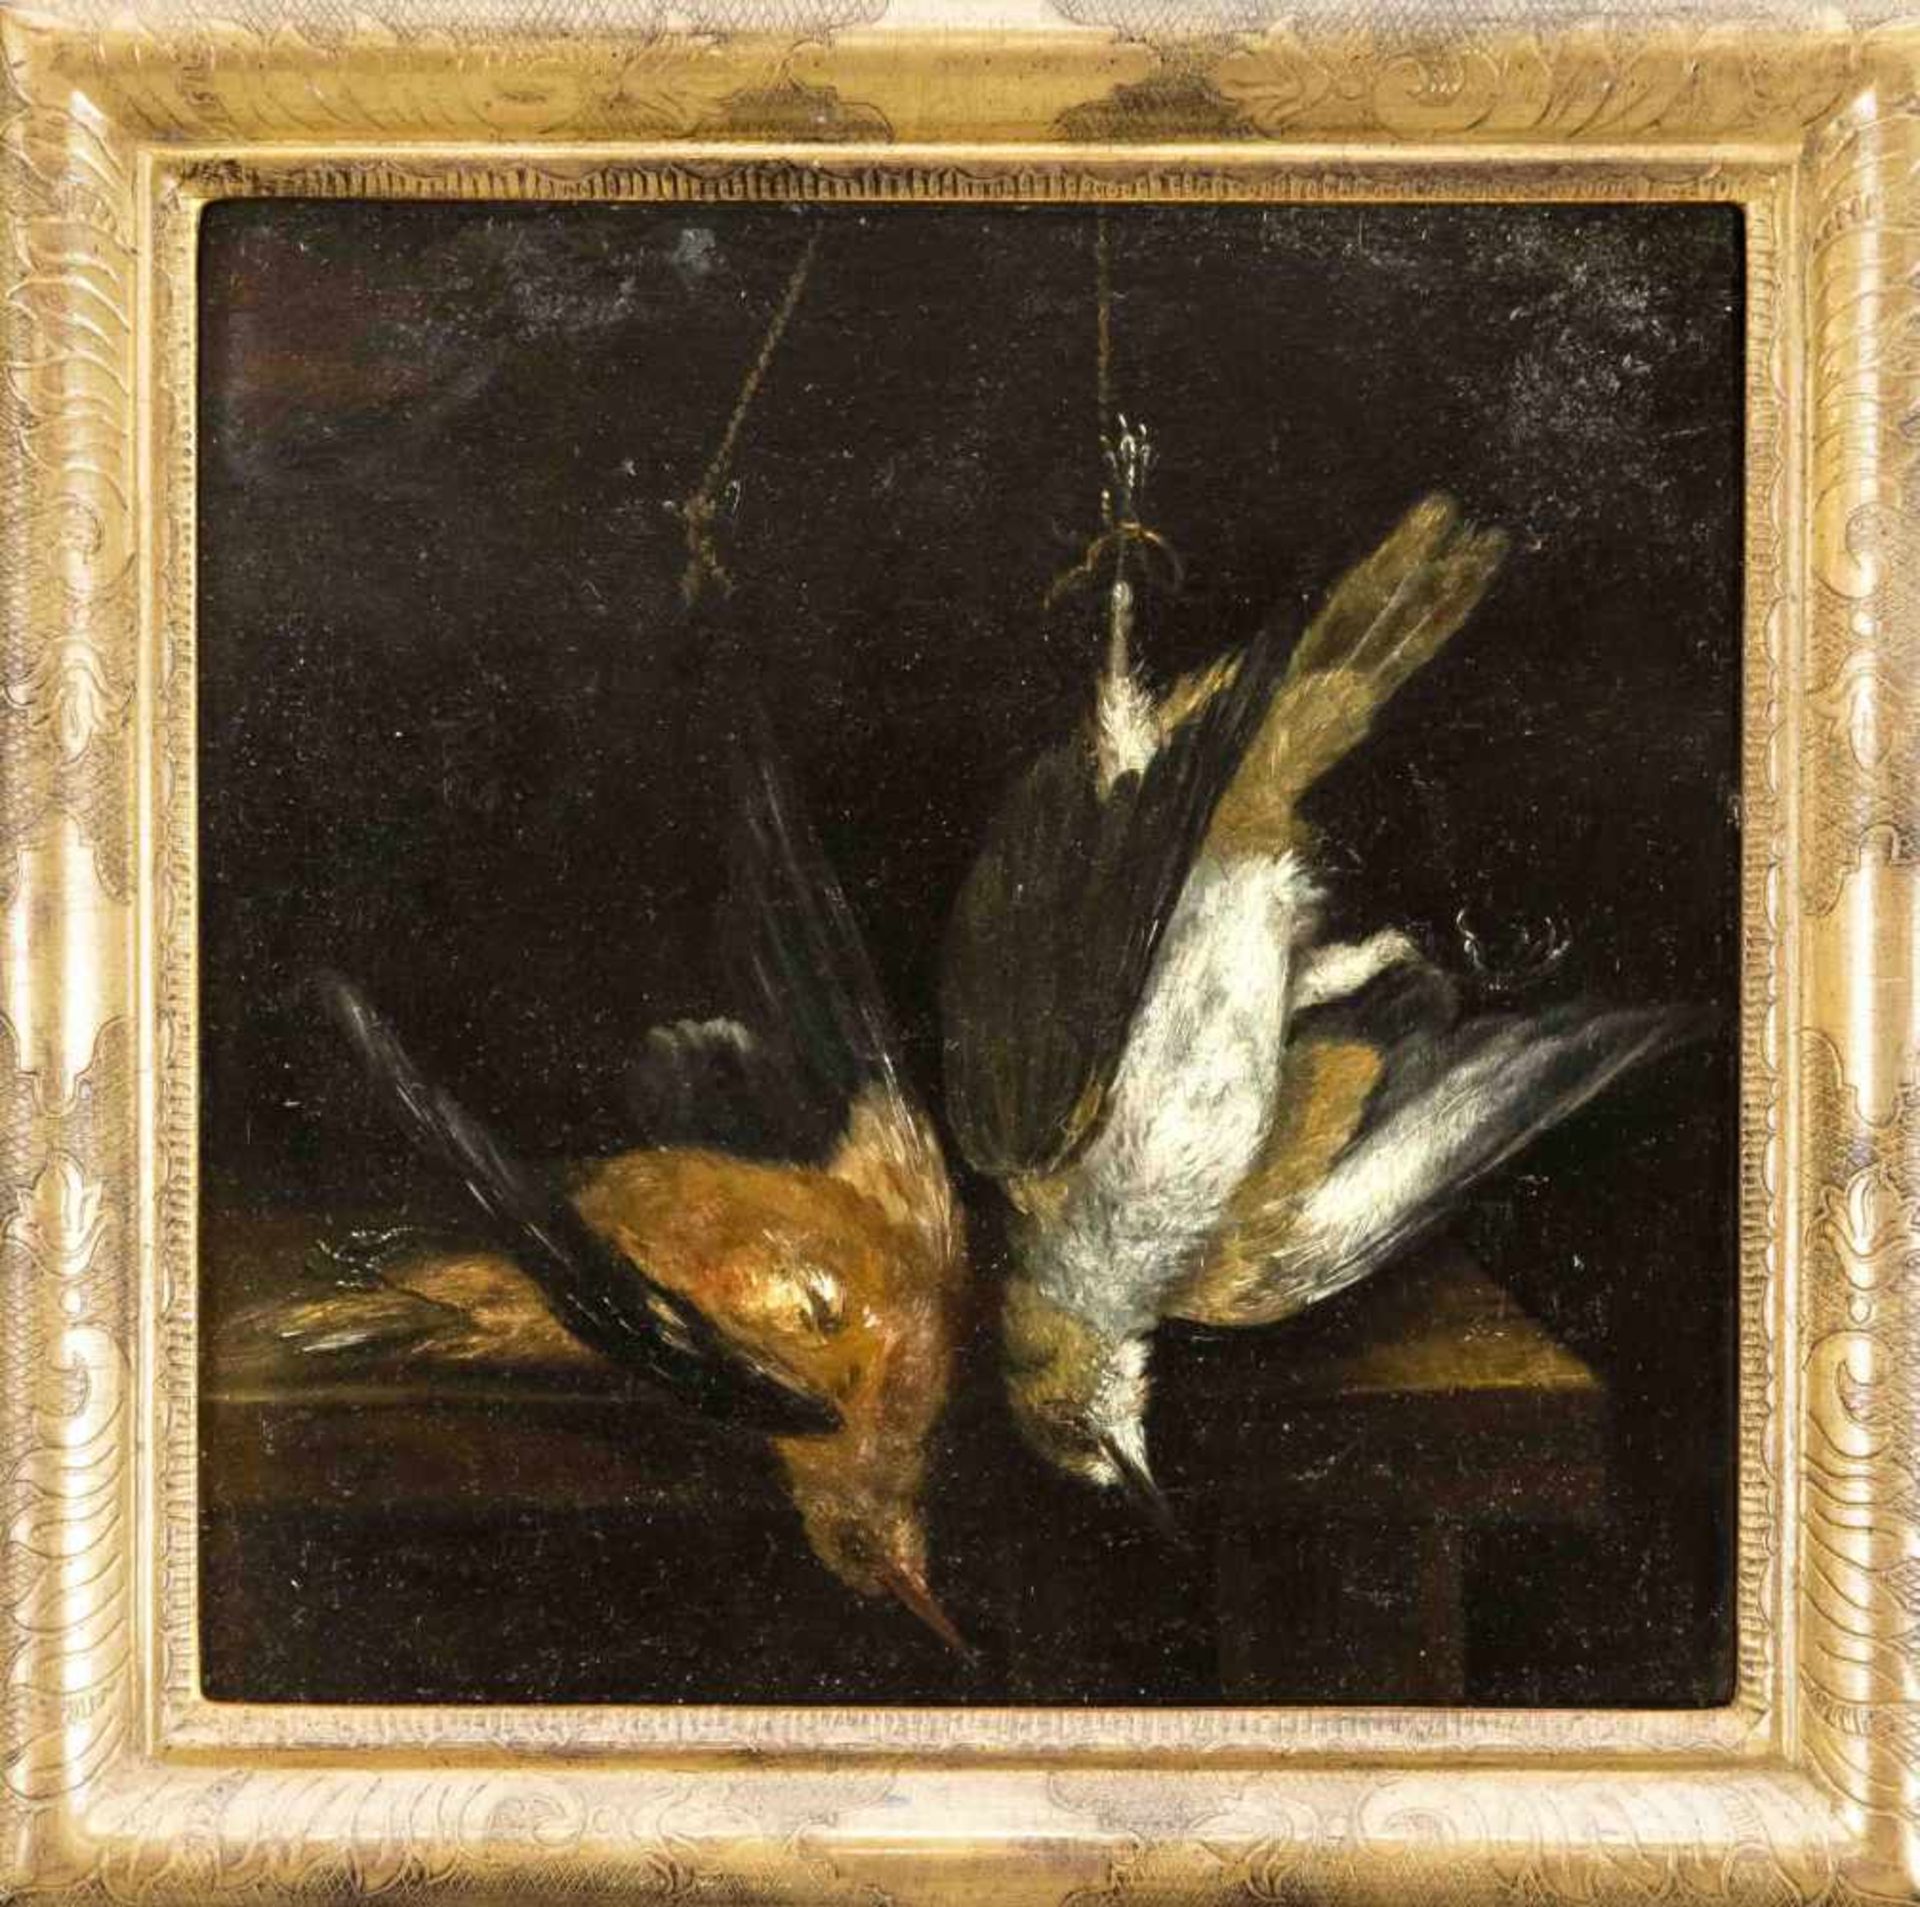 Still life painter of the 17th century, hunting still life with two birds hanging upside